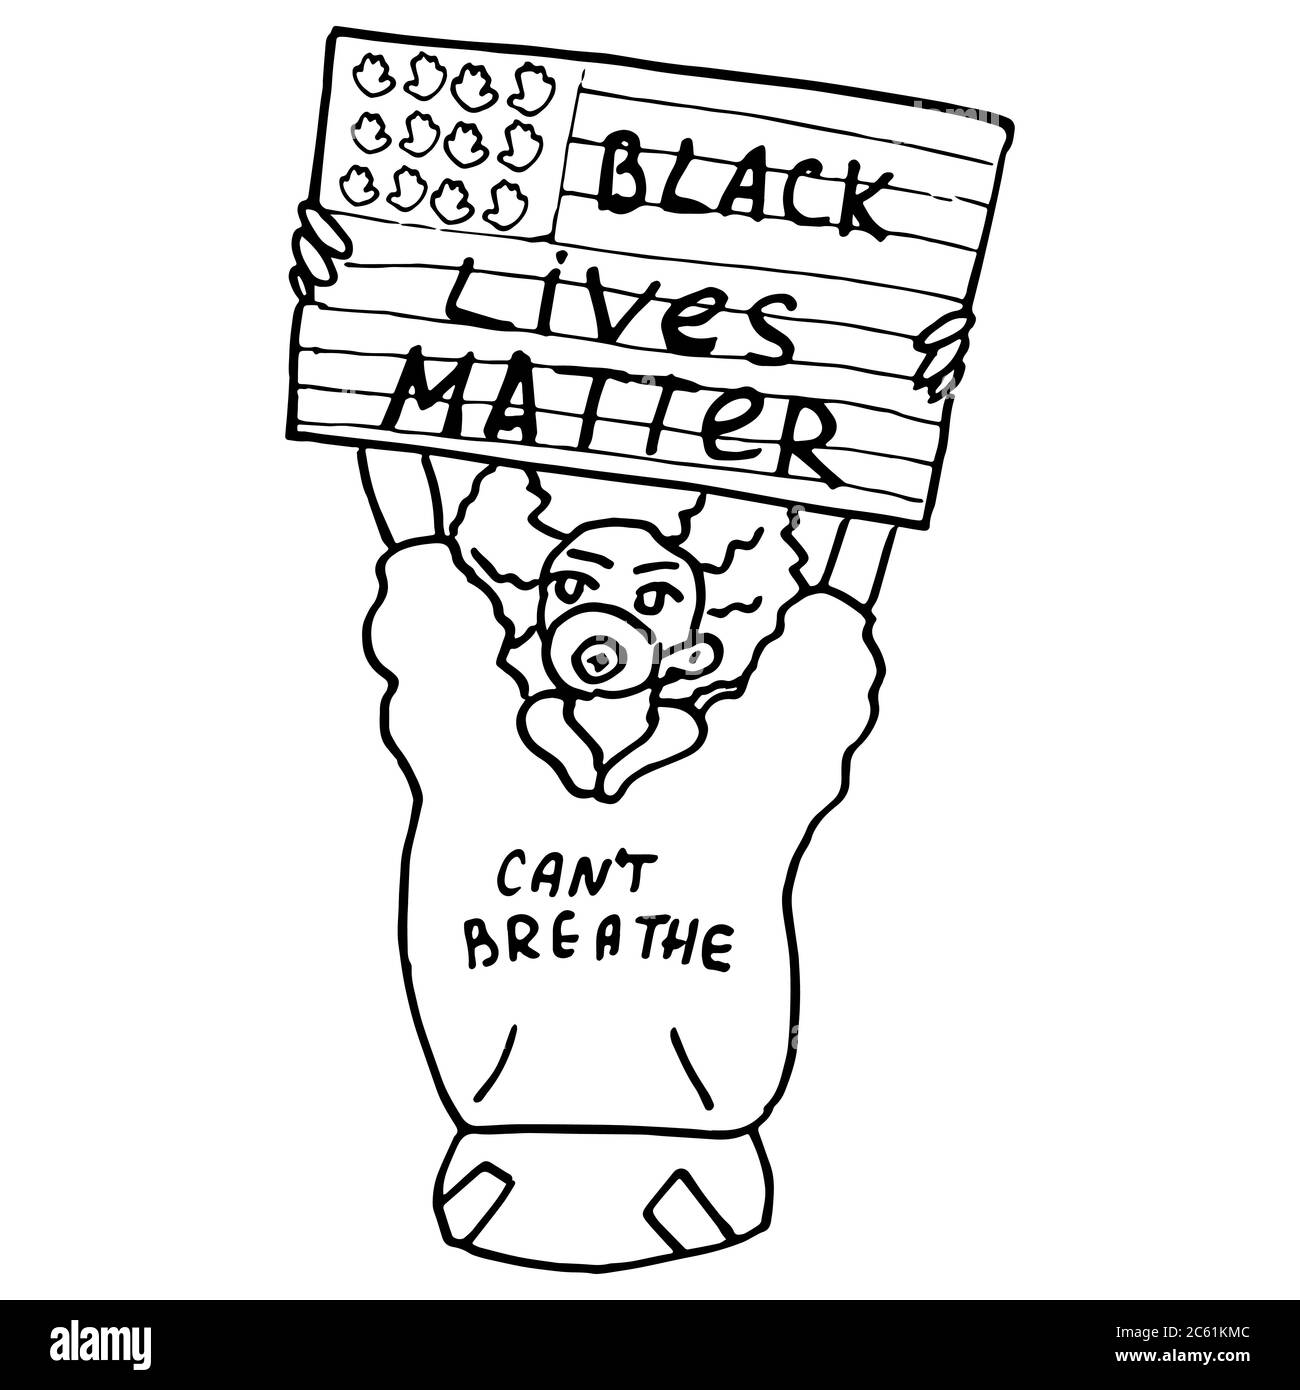 Black lives matter text on white isolated backdrop. Woman blm activist for invitation or gift card, social banner, news blog, flyer. Phone case or clo Stock Vector